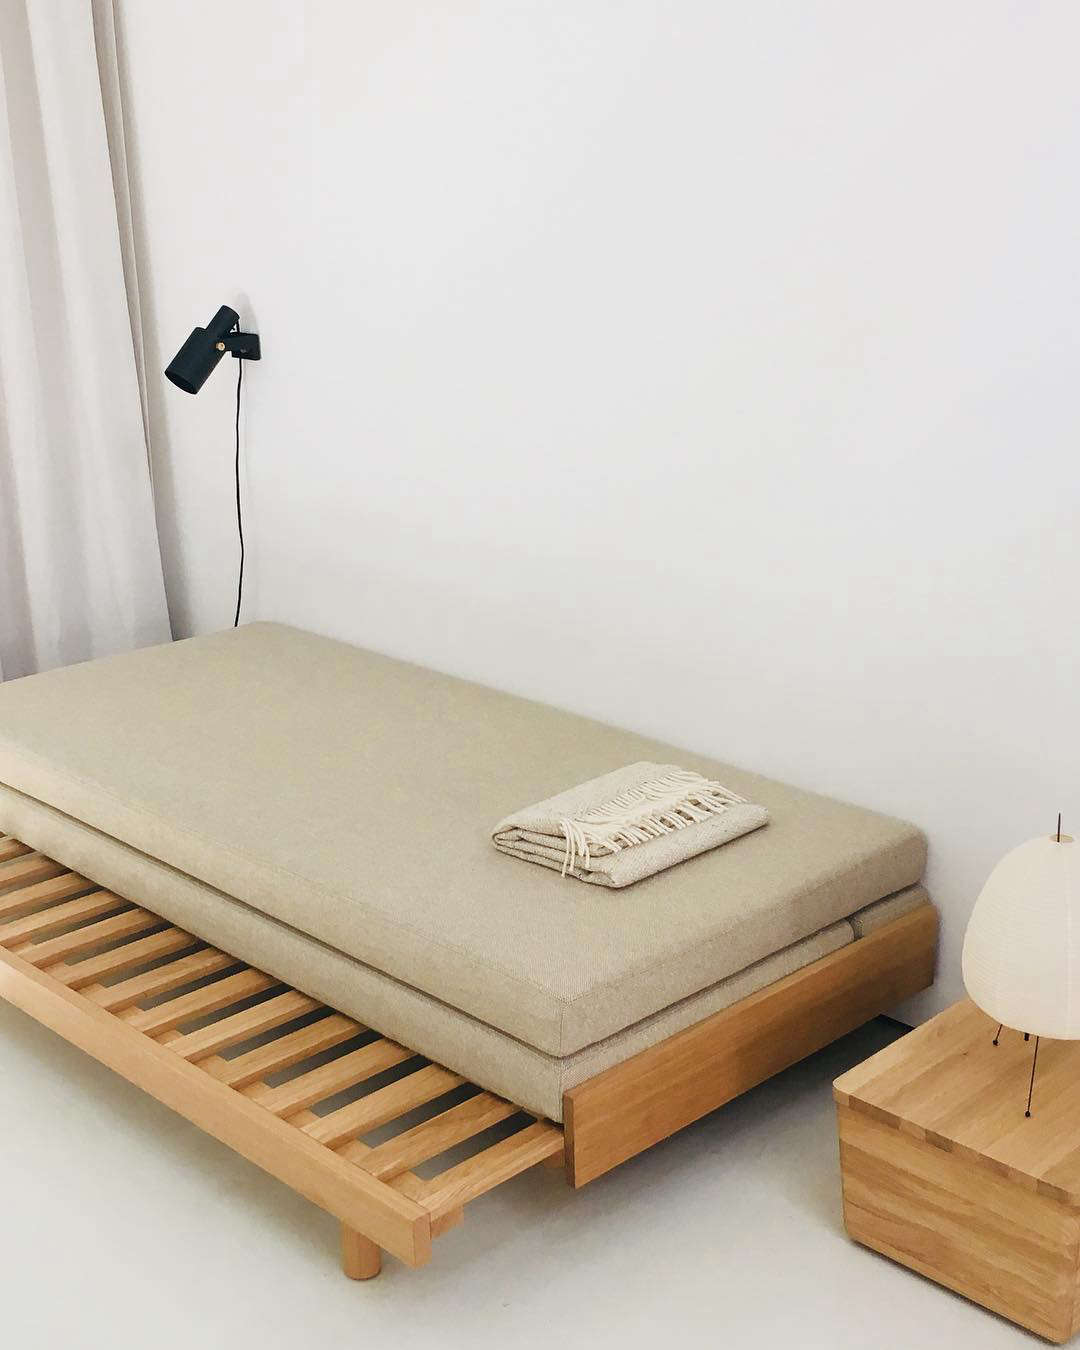 10 easy pieces: grown up guest beds 14